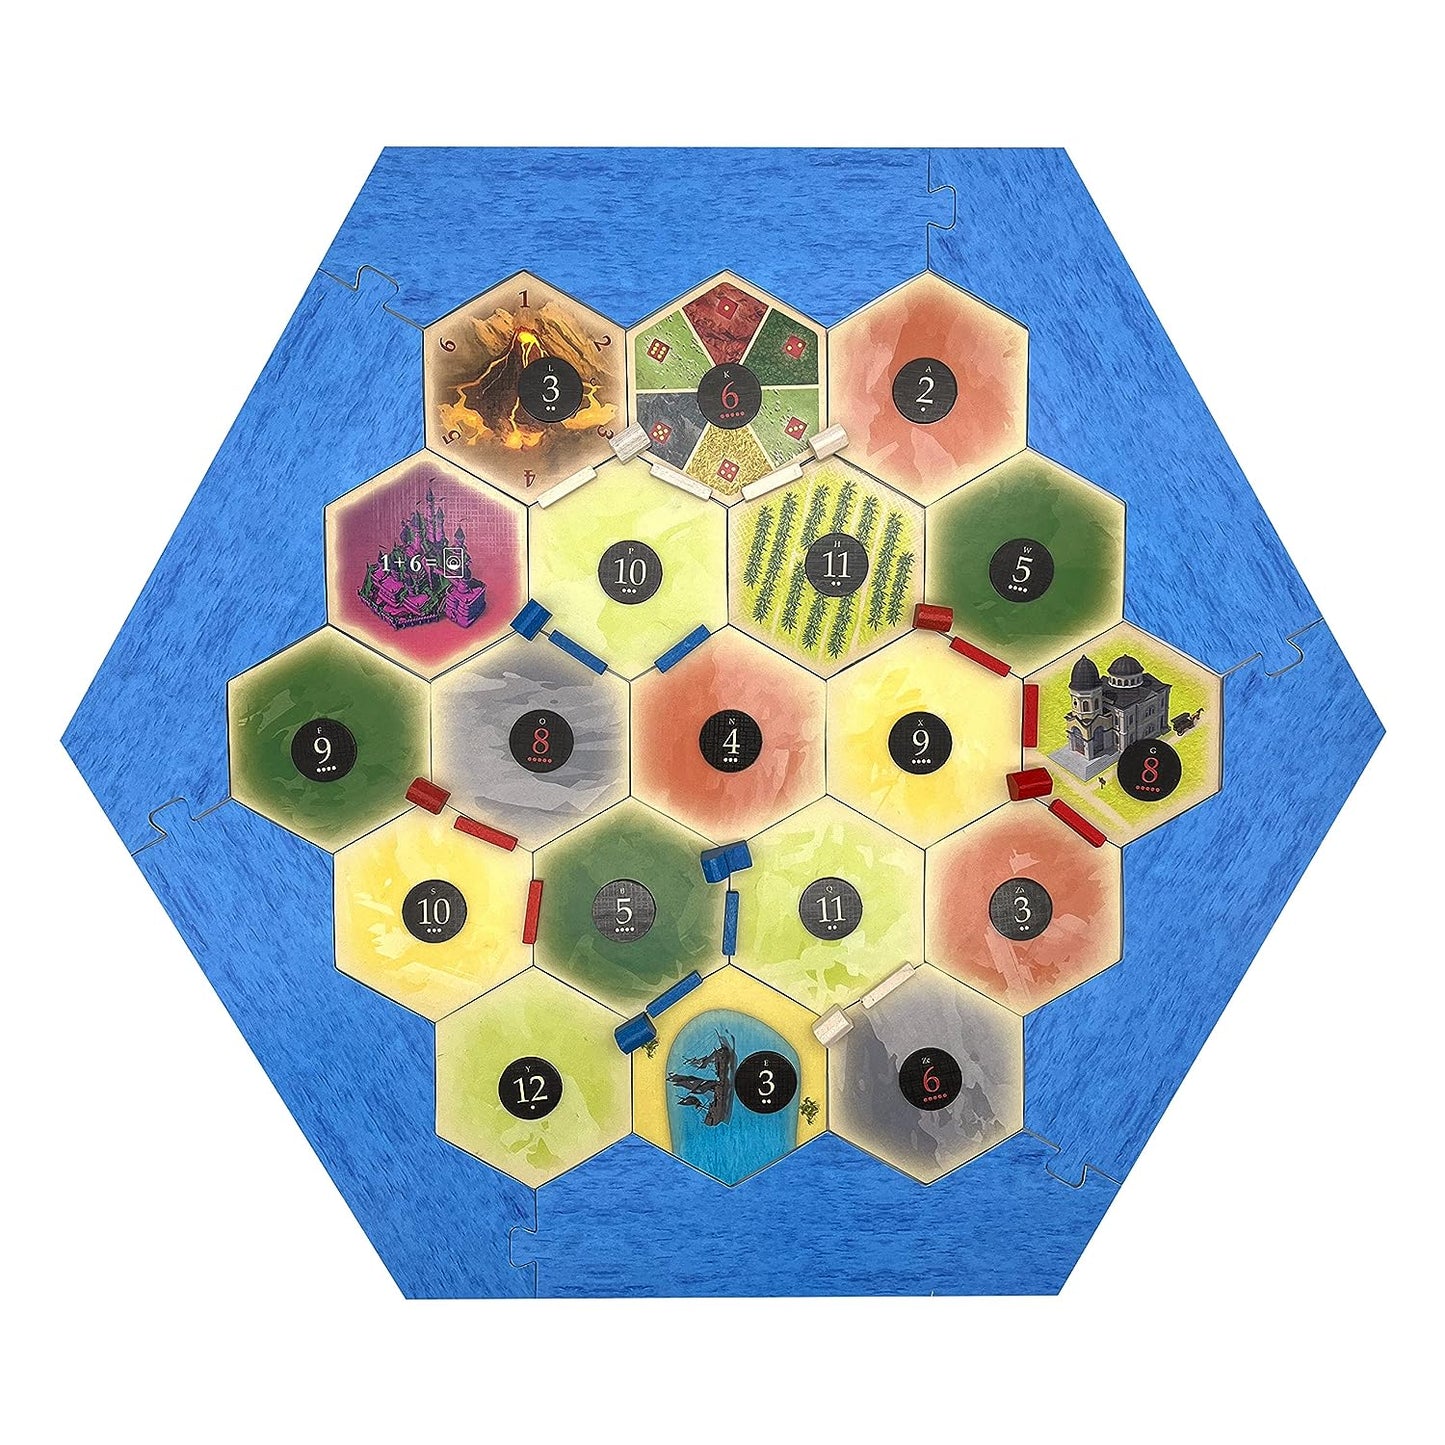 Triple Hex Pack - Wizard's Castle, Thieves' Guild and Plantation Scenarios compatible with Catan's Settlers of Catan